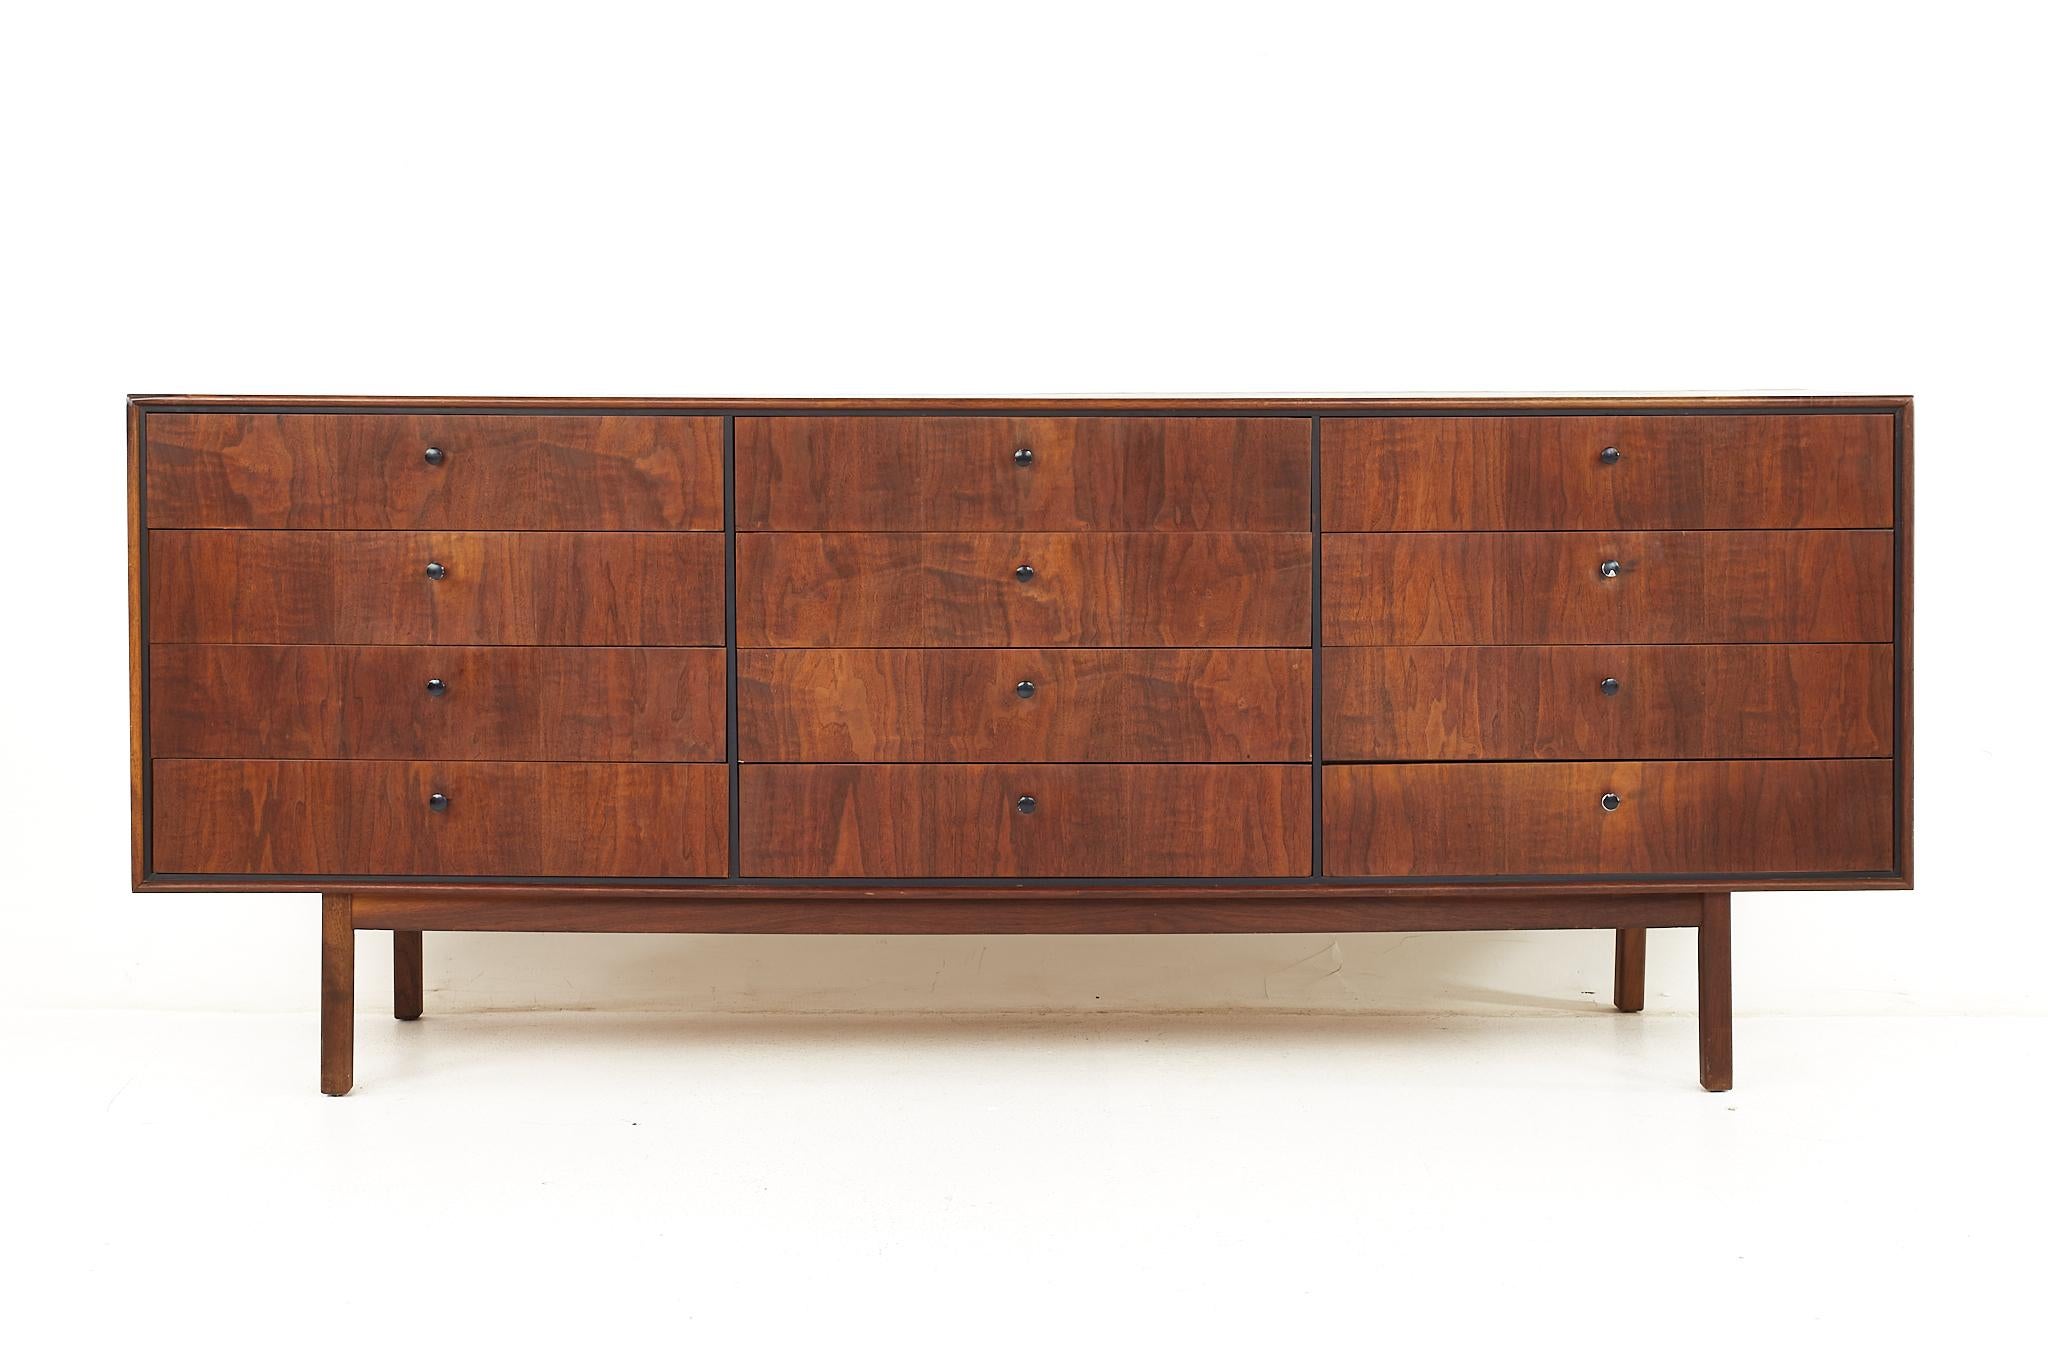 Jack Cartwright for founders mid century 12 drawer lowboy dresser

The dresser measures: 77.5 wide x 18 deep x 31 inches high

All pieces of furniture can be had in what we call restored vintage condition. That means the piece is restored upon